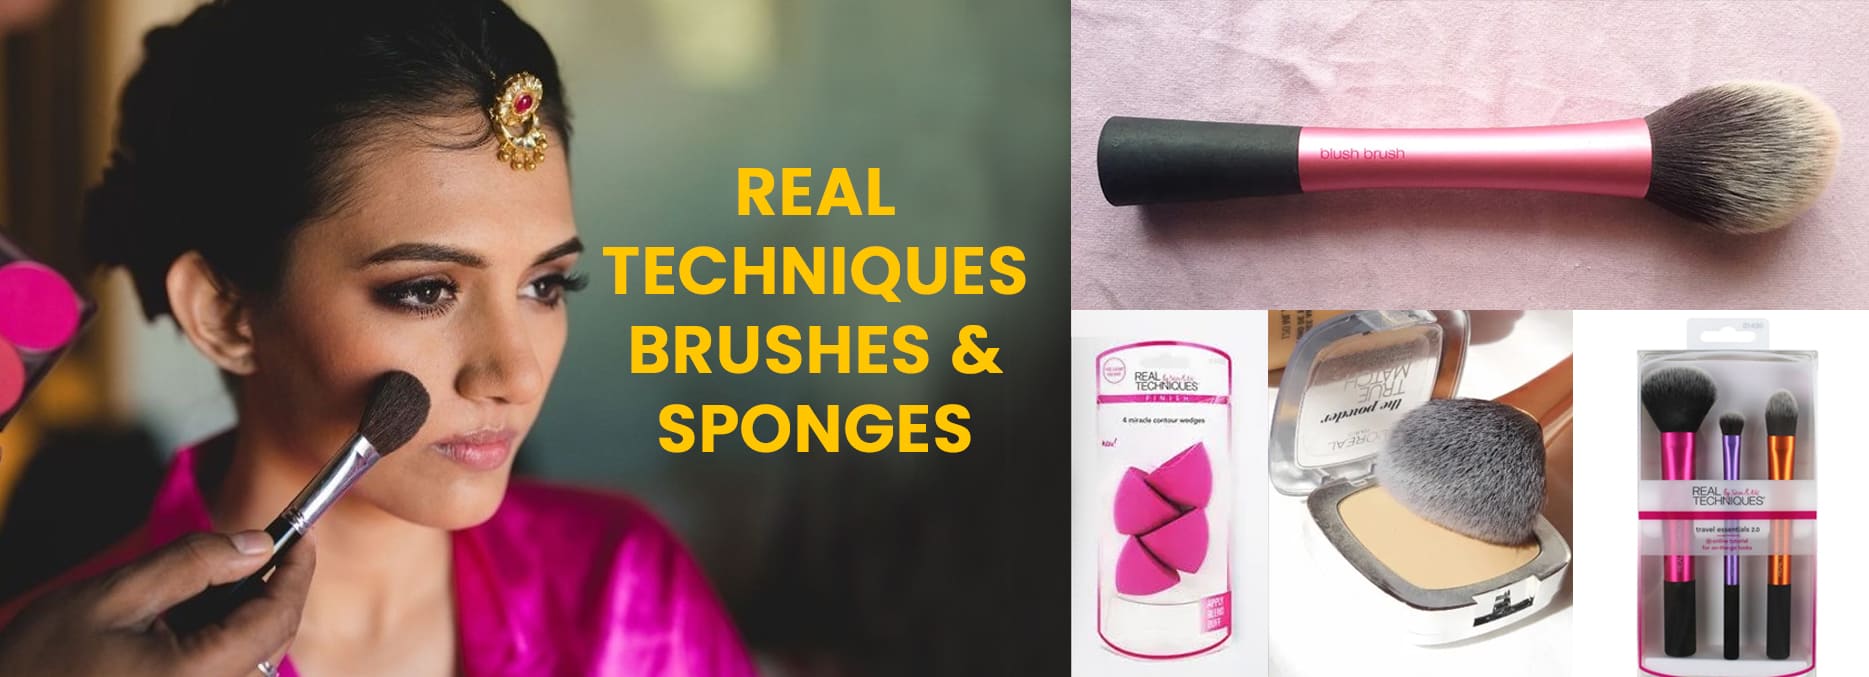 Real Techniques brushes and Sponges